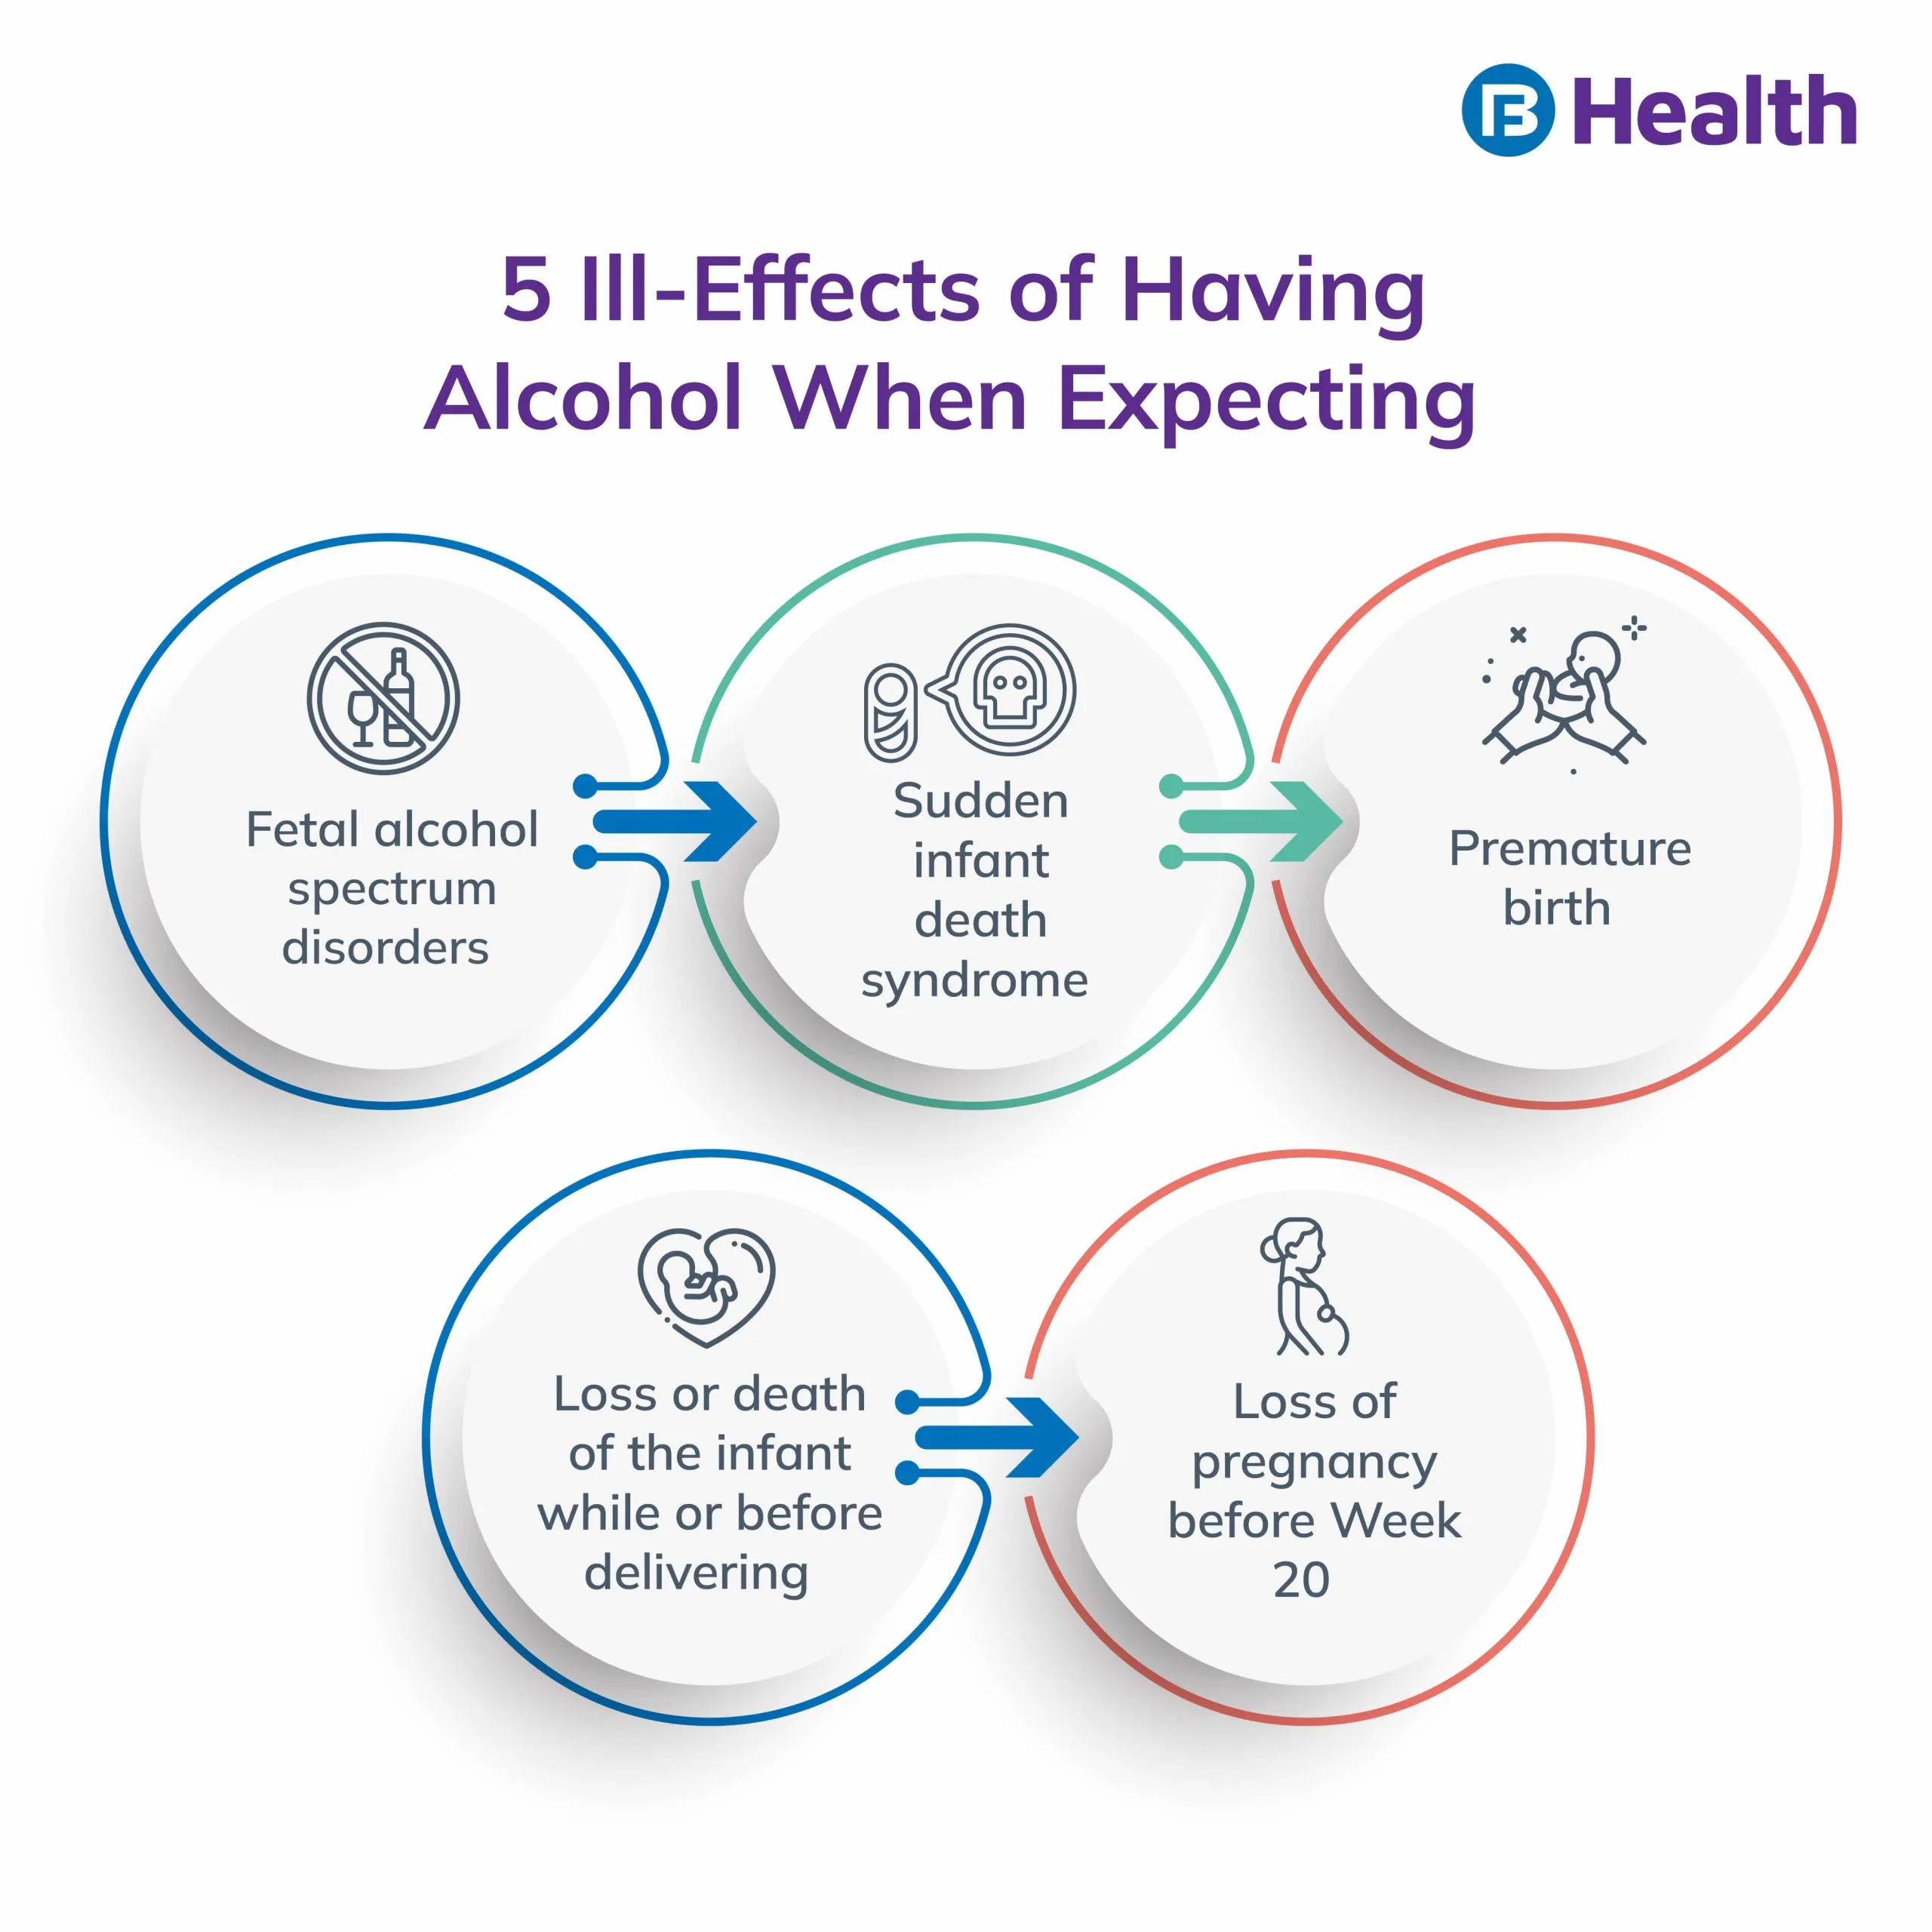 Alcohol ill-effects in pregnancy